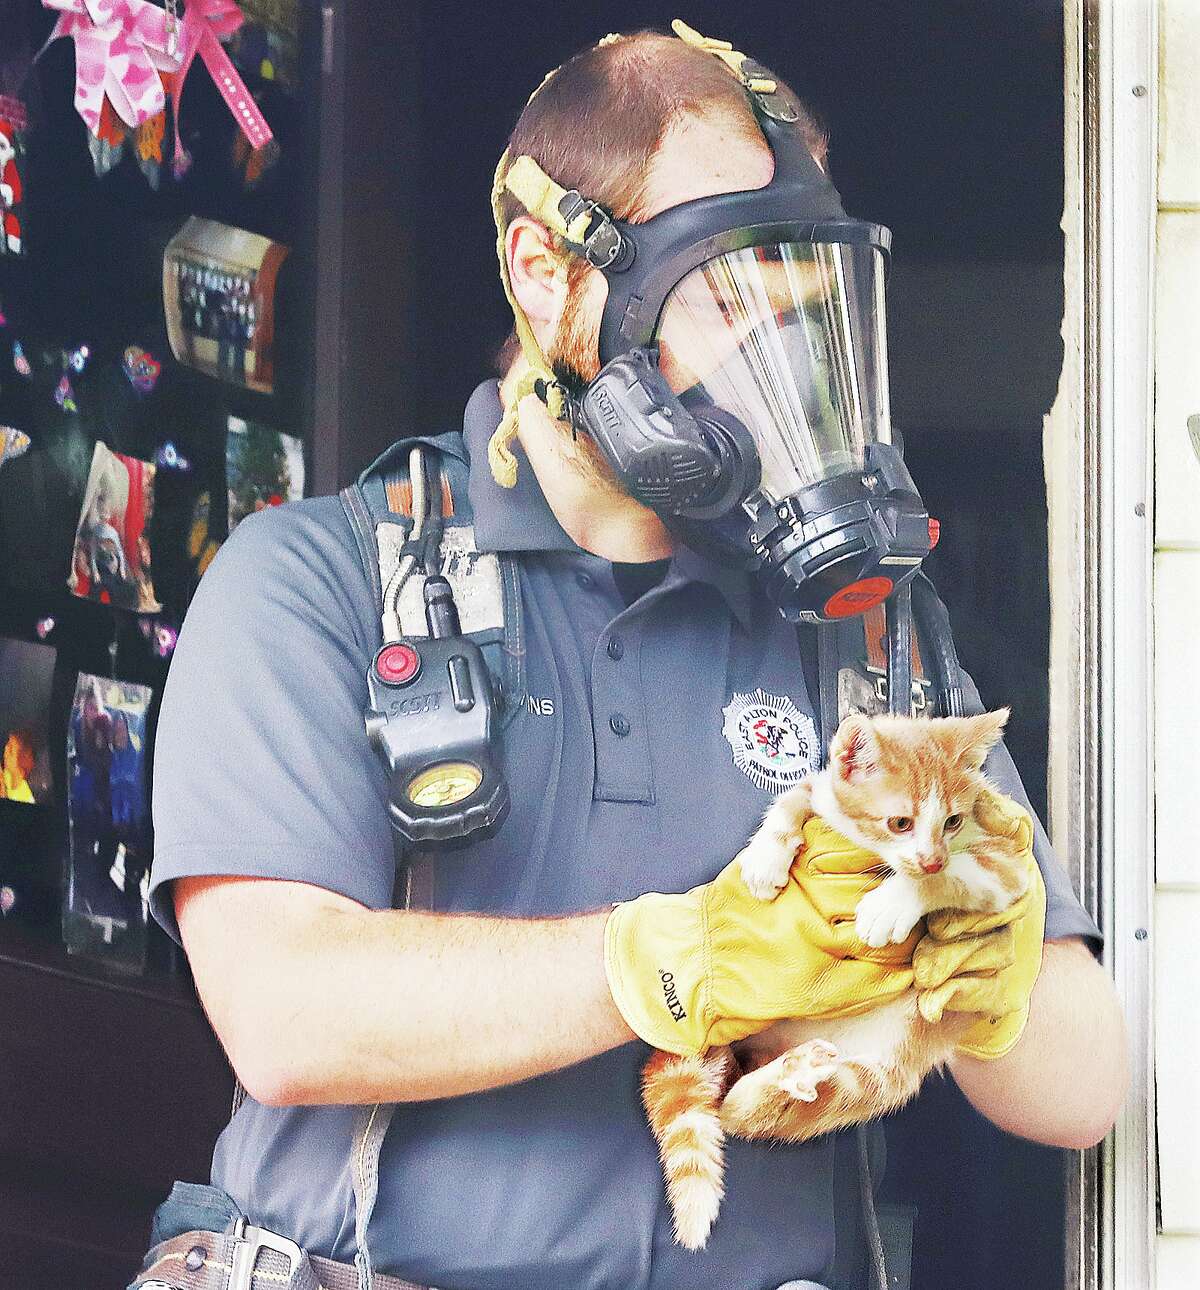 John Badman|The Telegraph An East Alton Police officer, wearing a fire department tank of breathable air, carries out one of about 20 cats from a duplex Wednesday in the 100 block of Ohio Street.